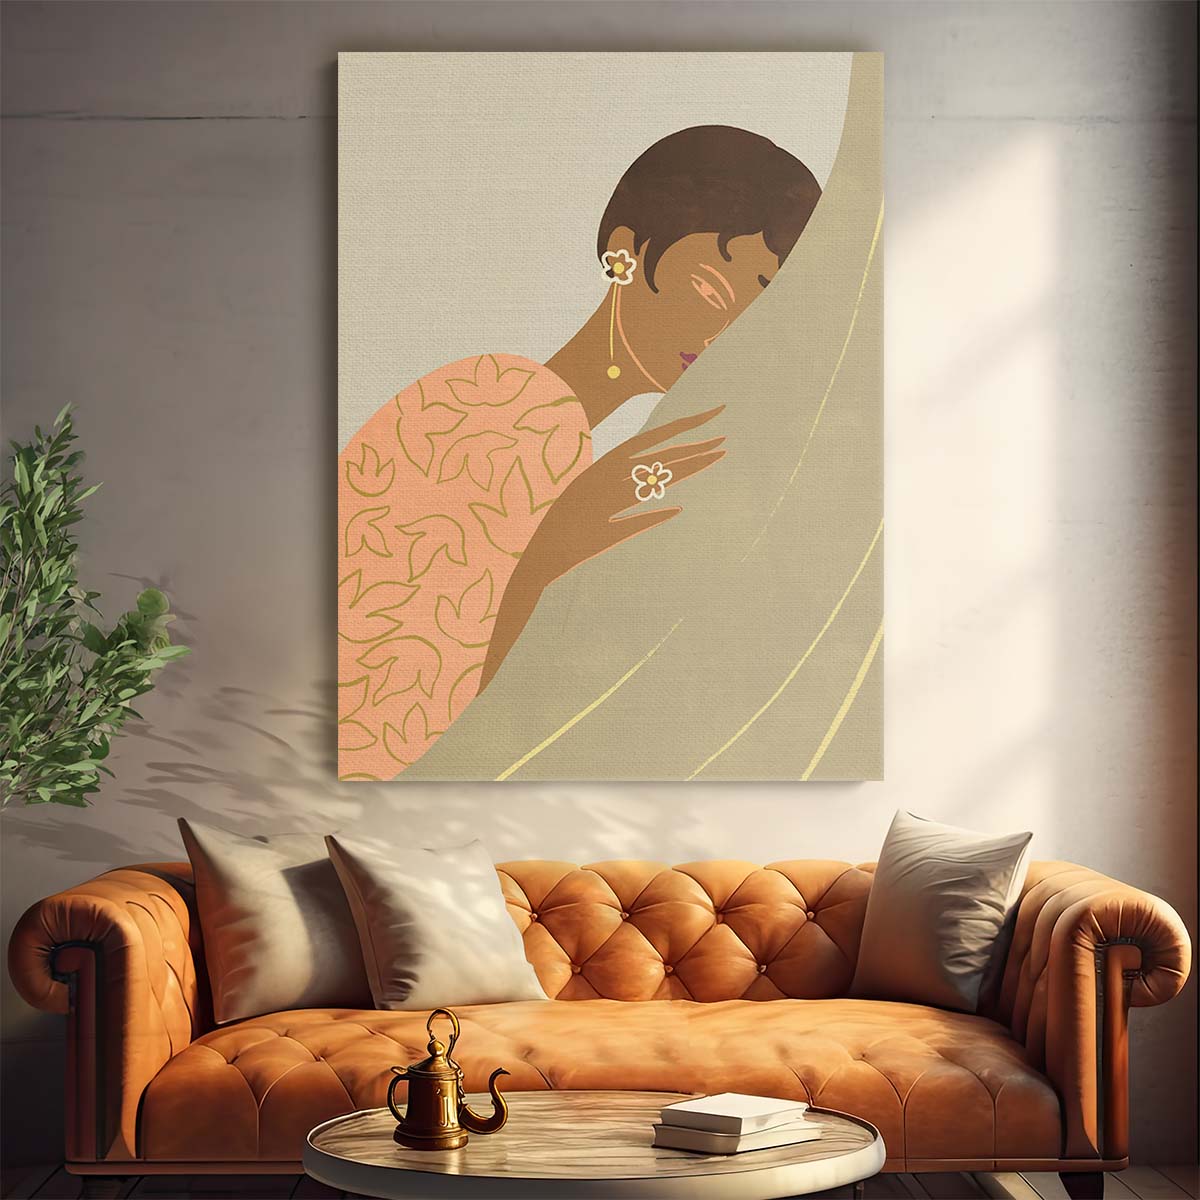 Relaxing Boho Woman Illustration with Pastel Floral Pattern Wall Art by Luxuriance Designs, made in USA